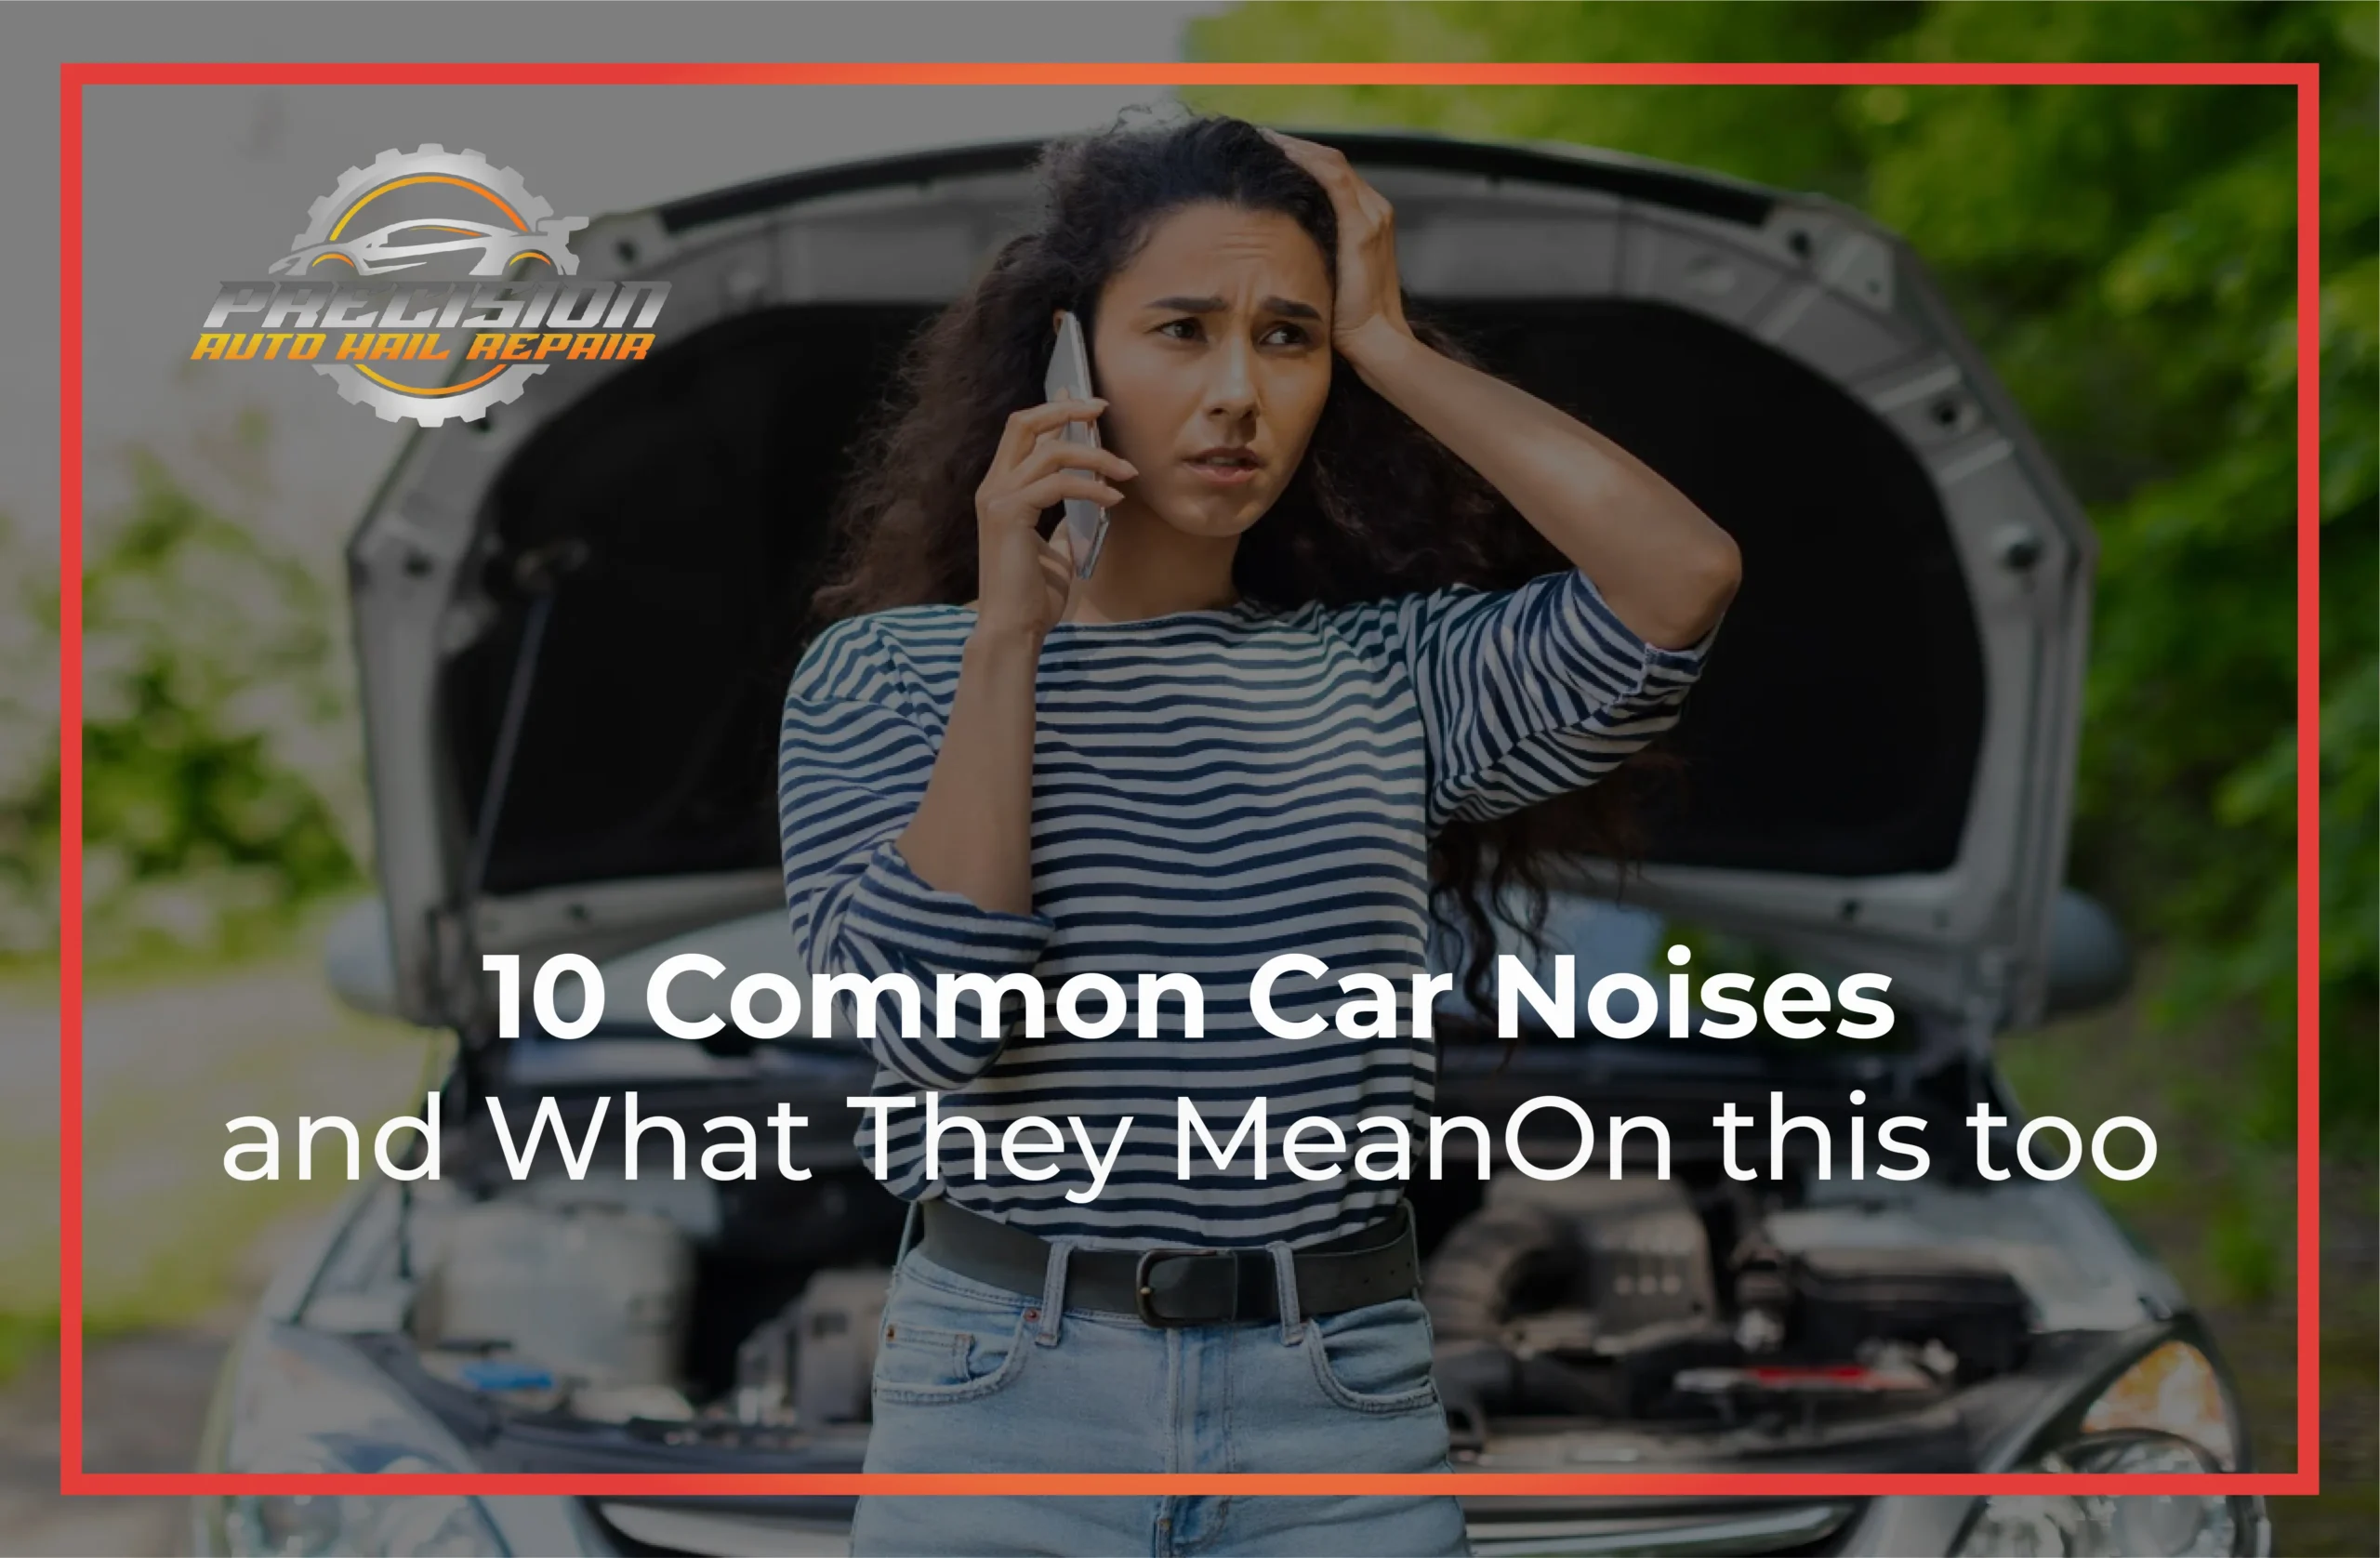 Common Car Noises and What They Mean